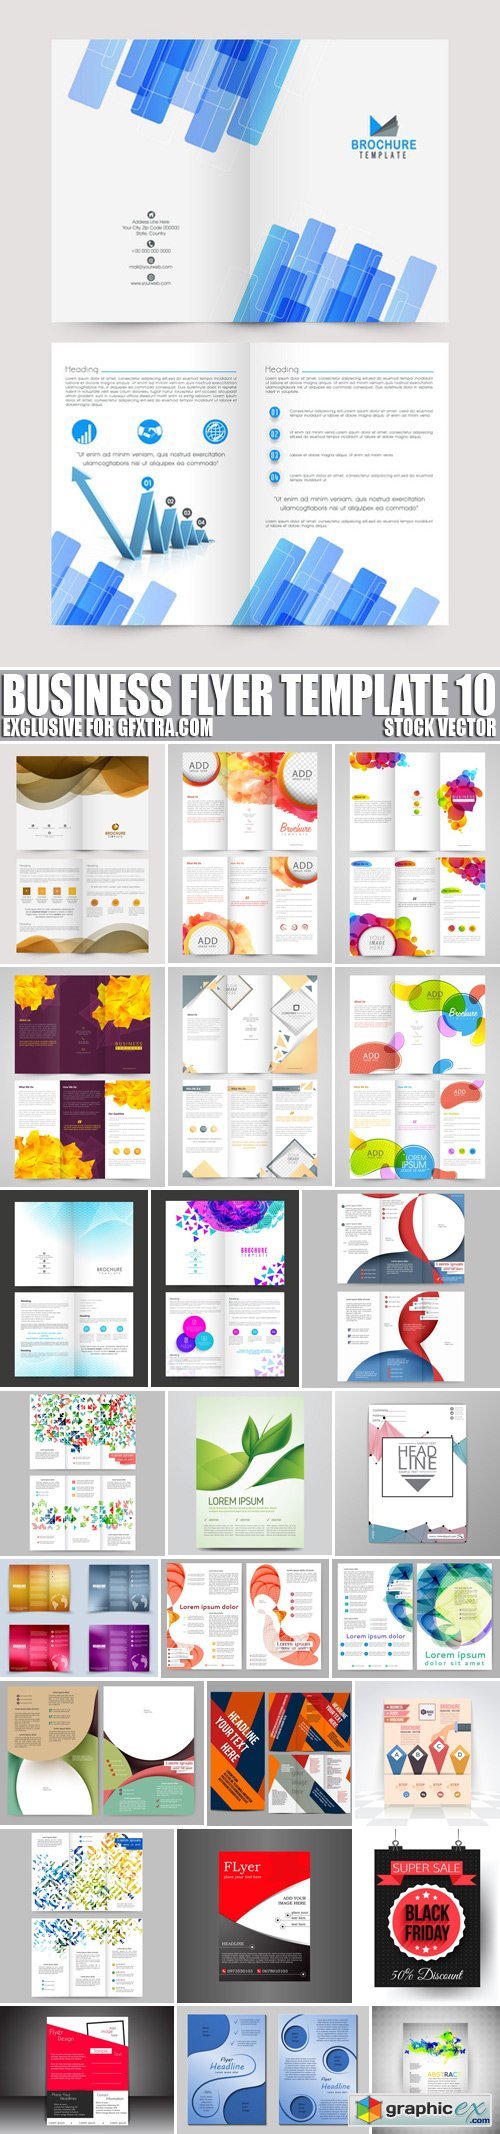 Stock Vectors - Business Flyer Template 10, 25xEPS